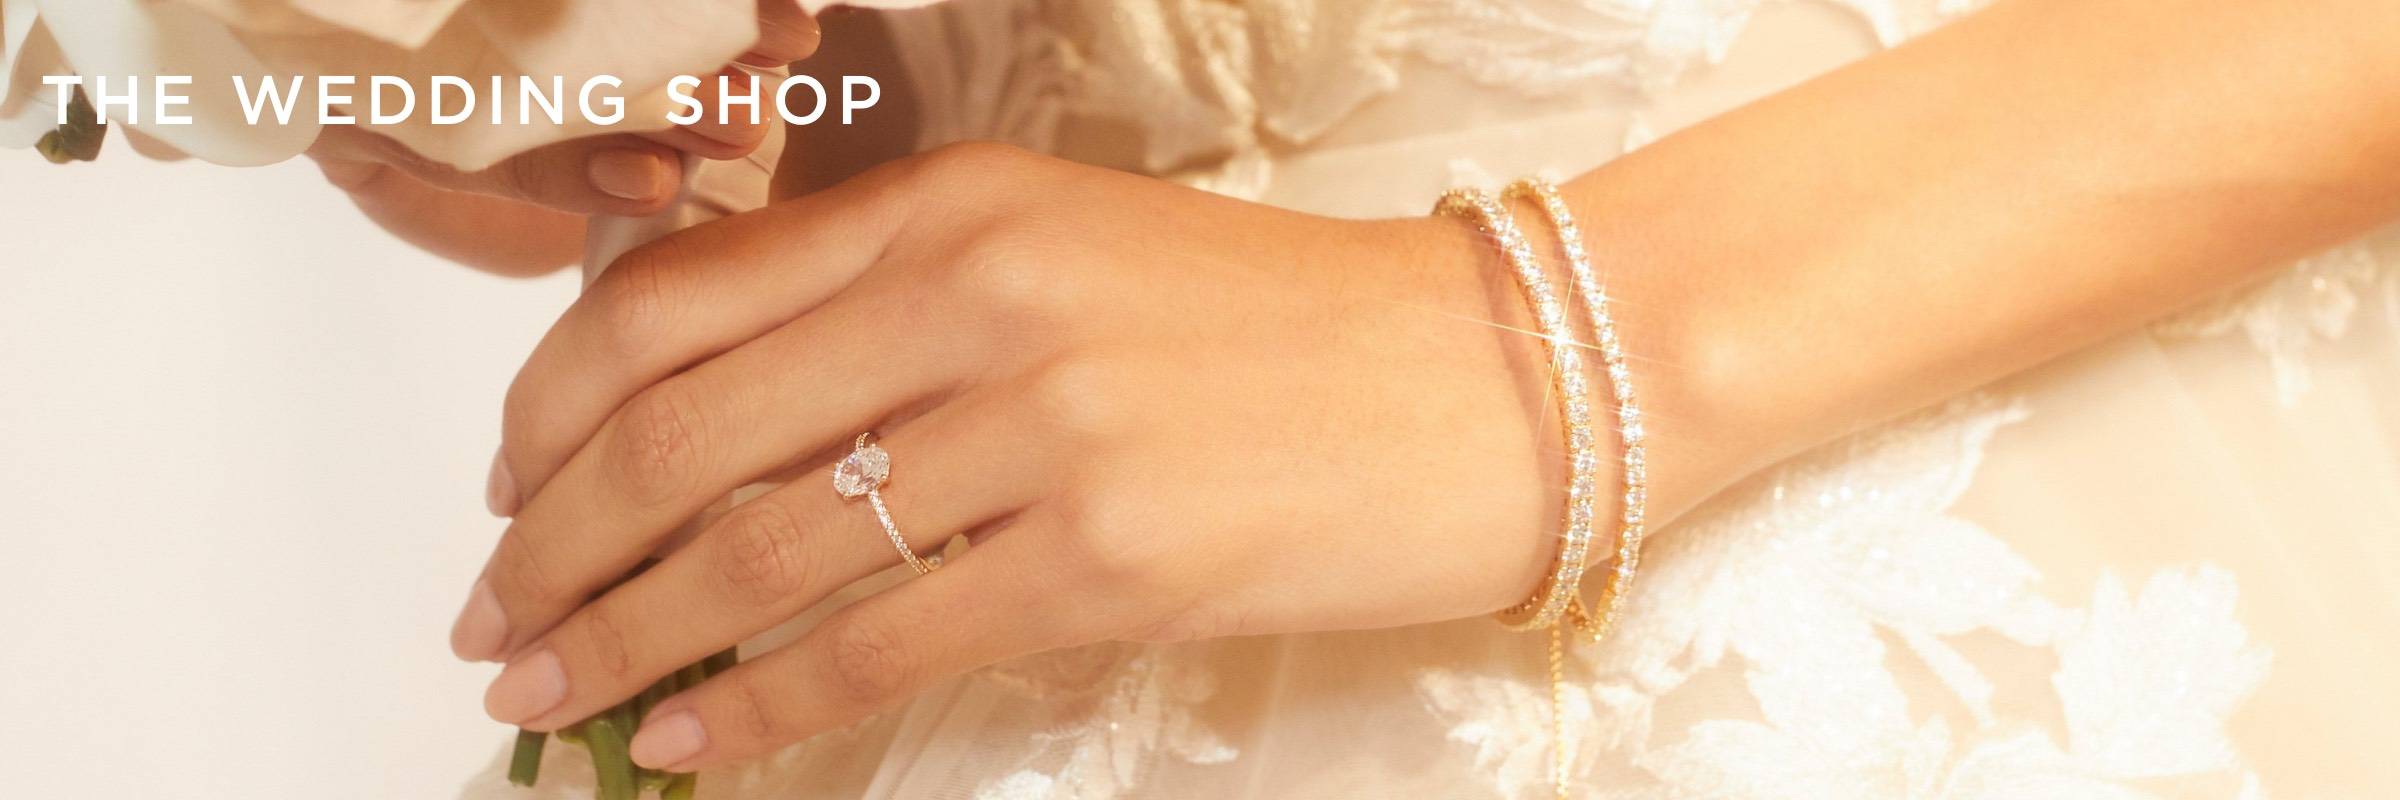 The Wedding Shop. Image of a bride's hand with an oval solitaire CZ ring and two CZ tennis bracelets.